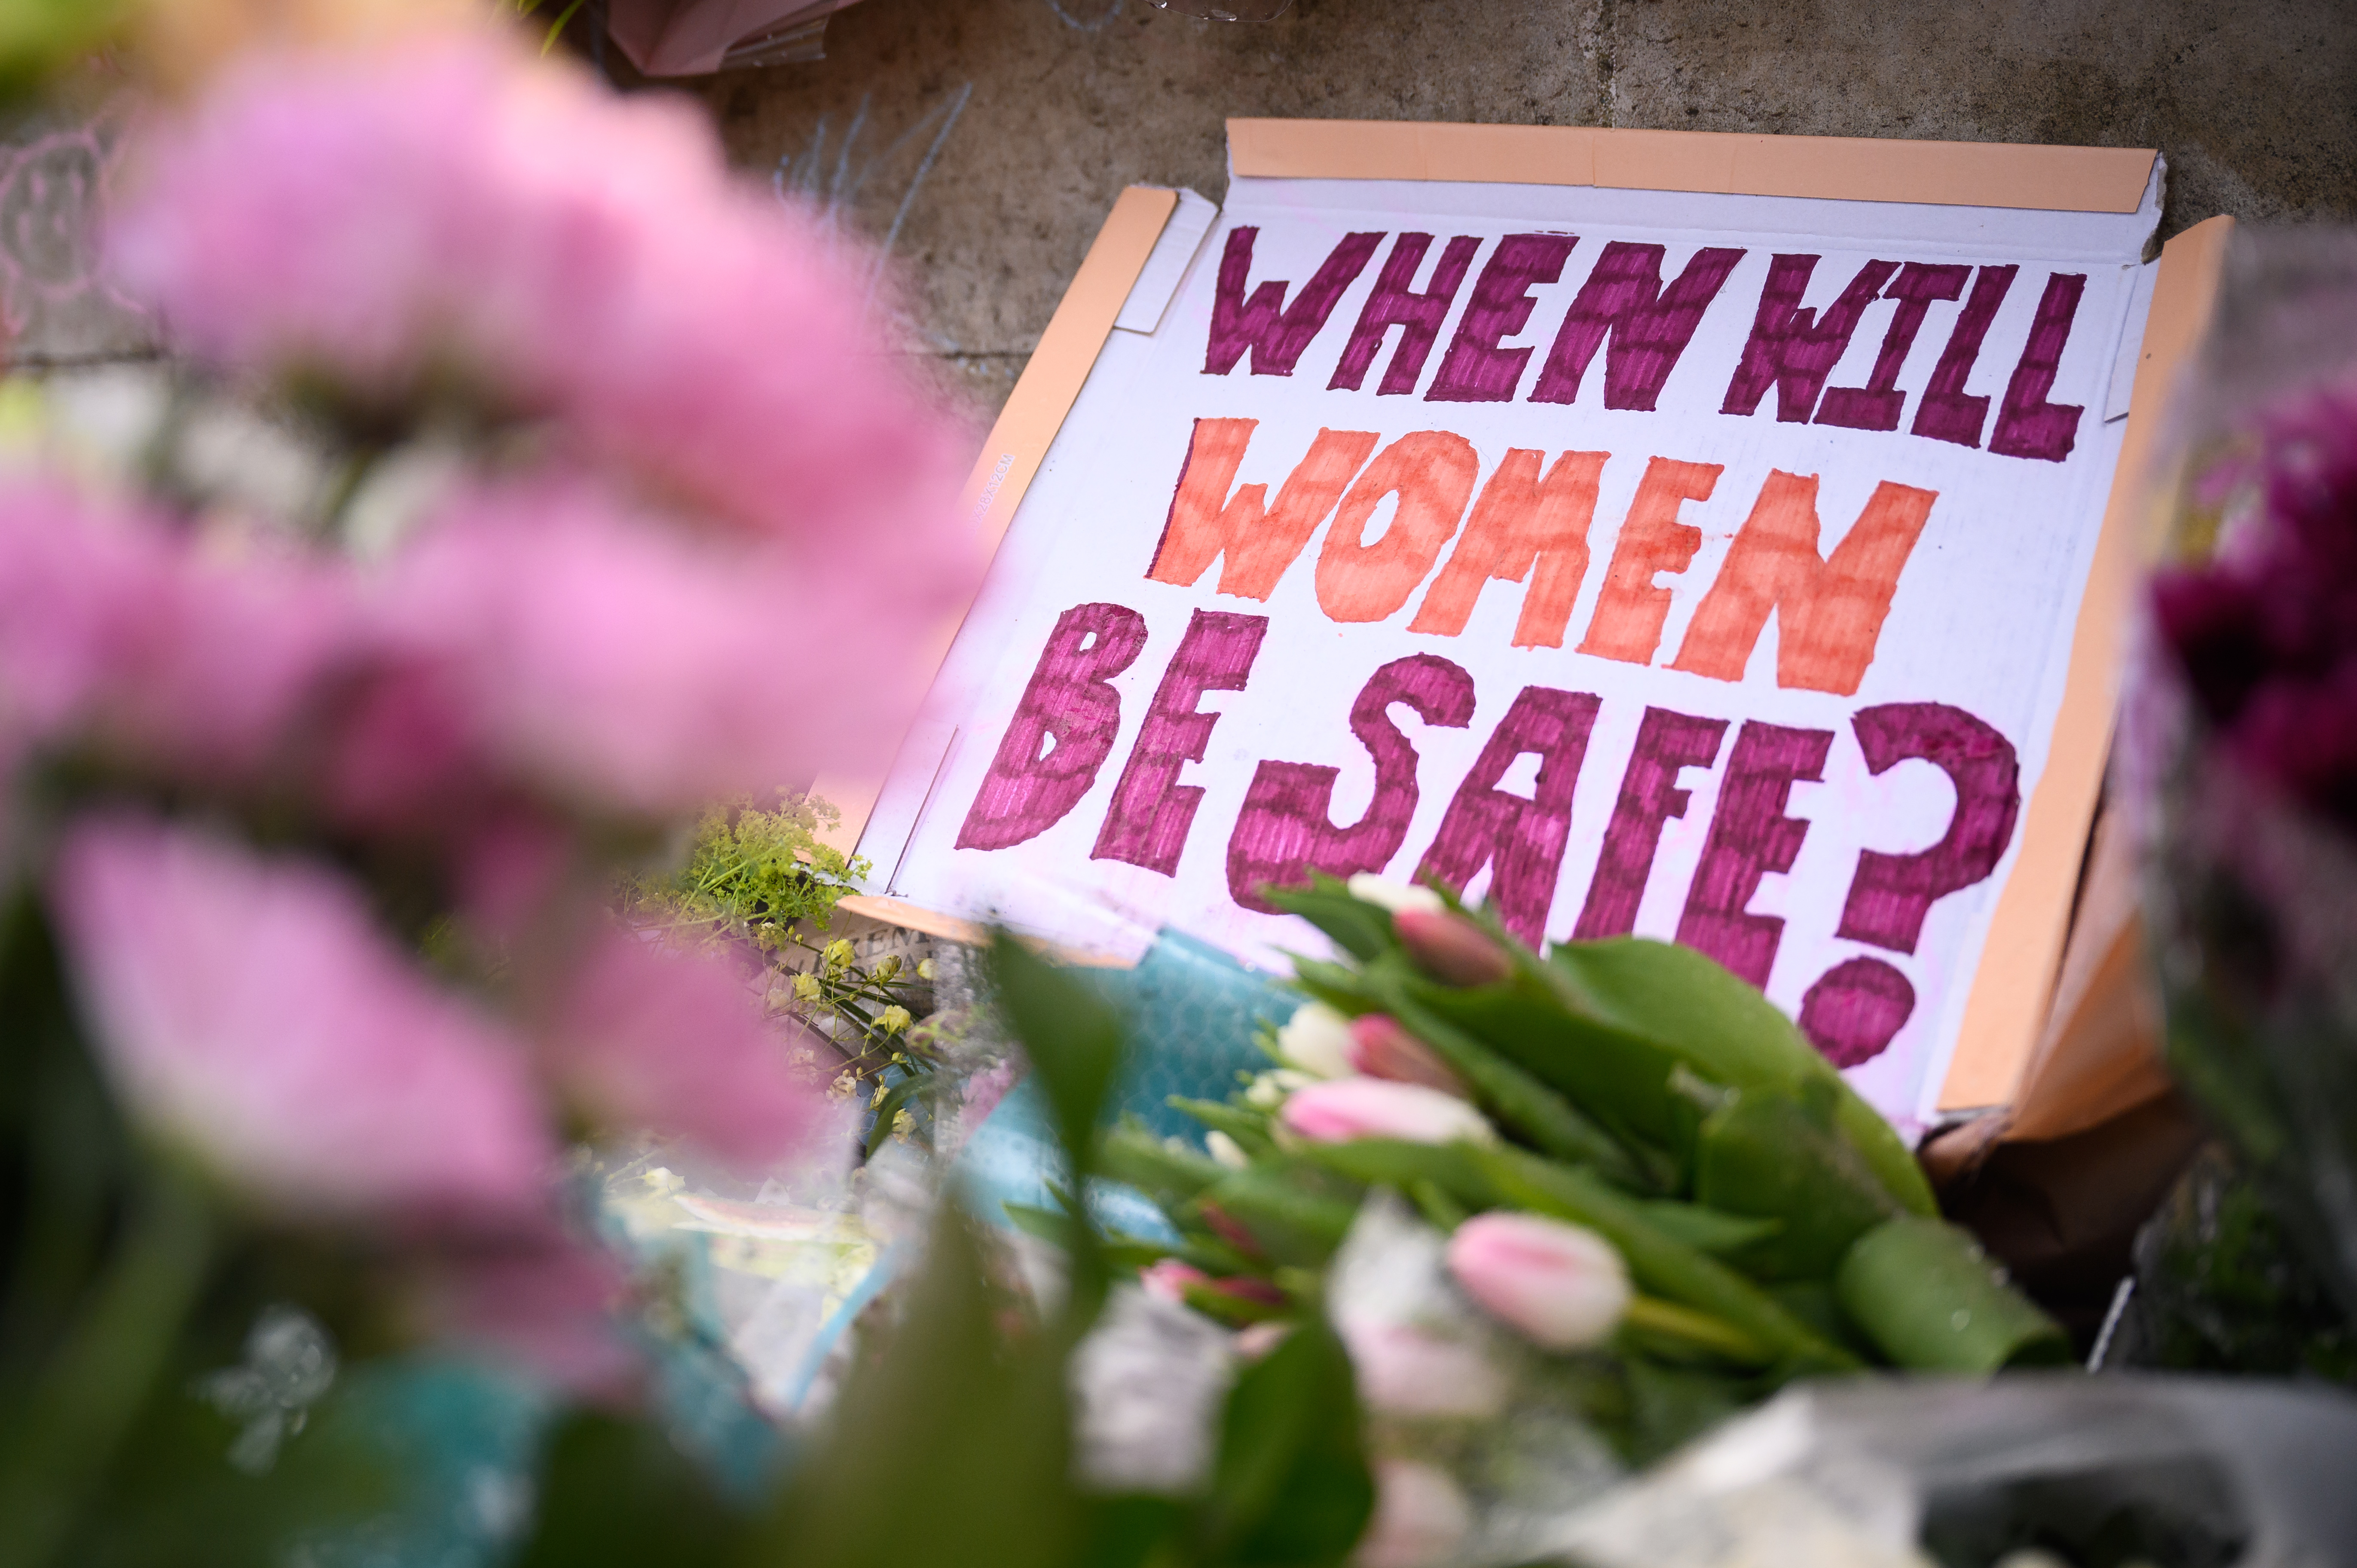 A message "WHEN WILL WOMEN BE SAFE" is seen among flowers on Clapham Common photo.